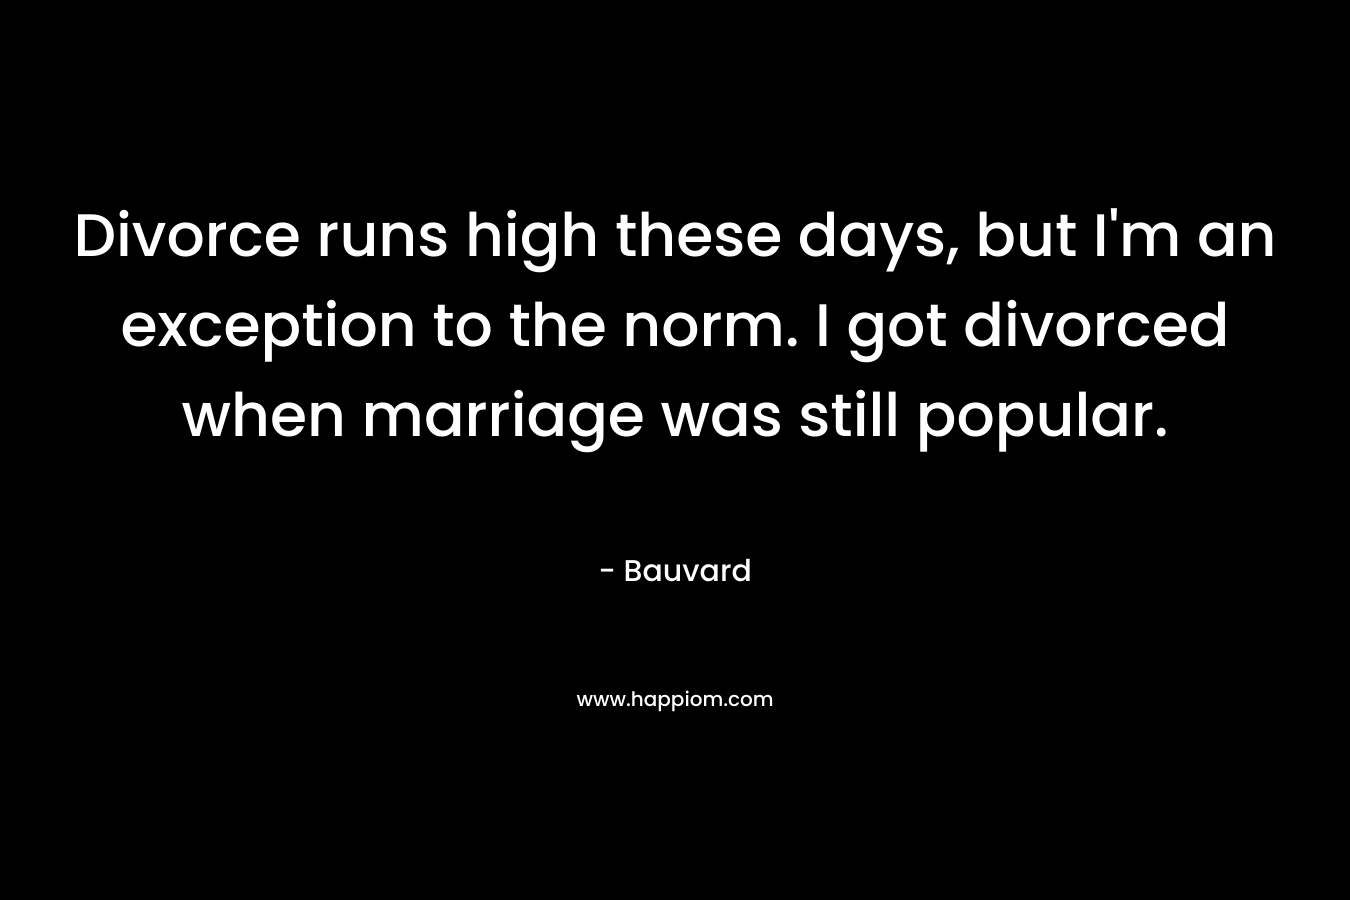 Divorce runs high these days, but I'm an exception to the norm. I got divorced when marriage was still popular.